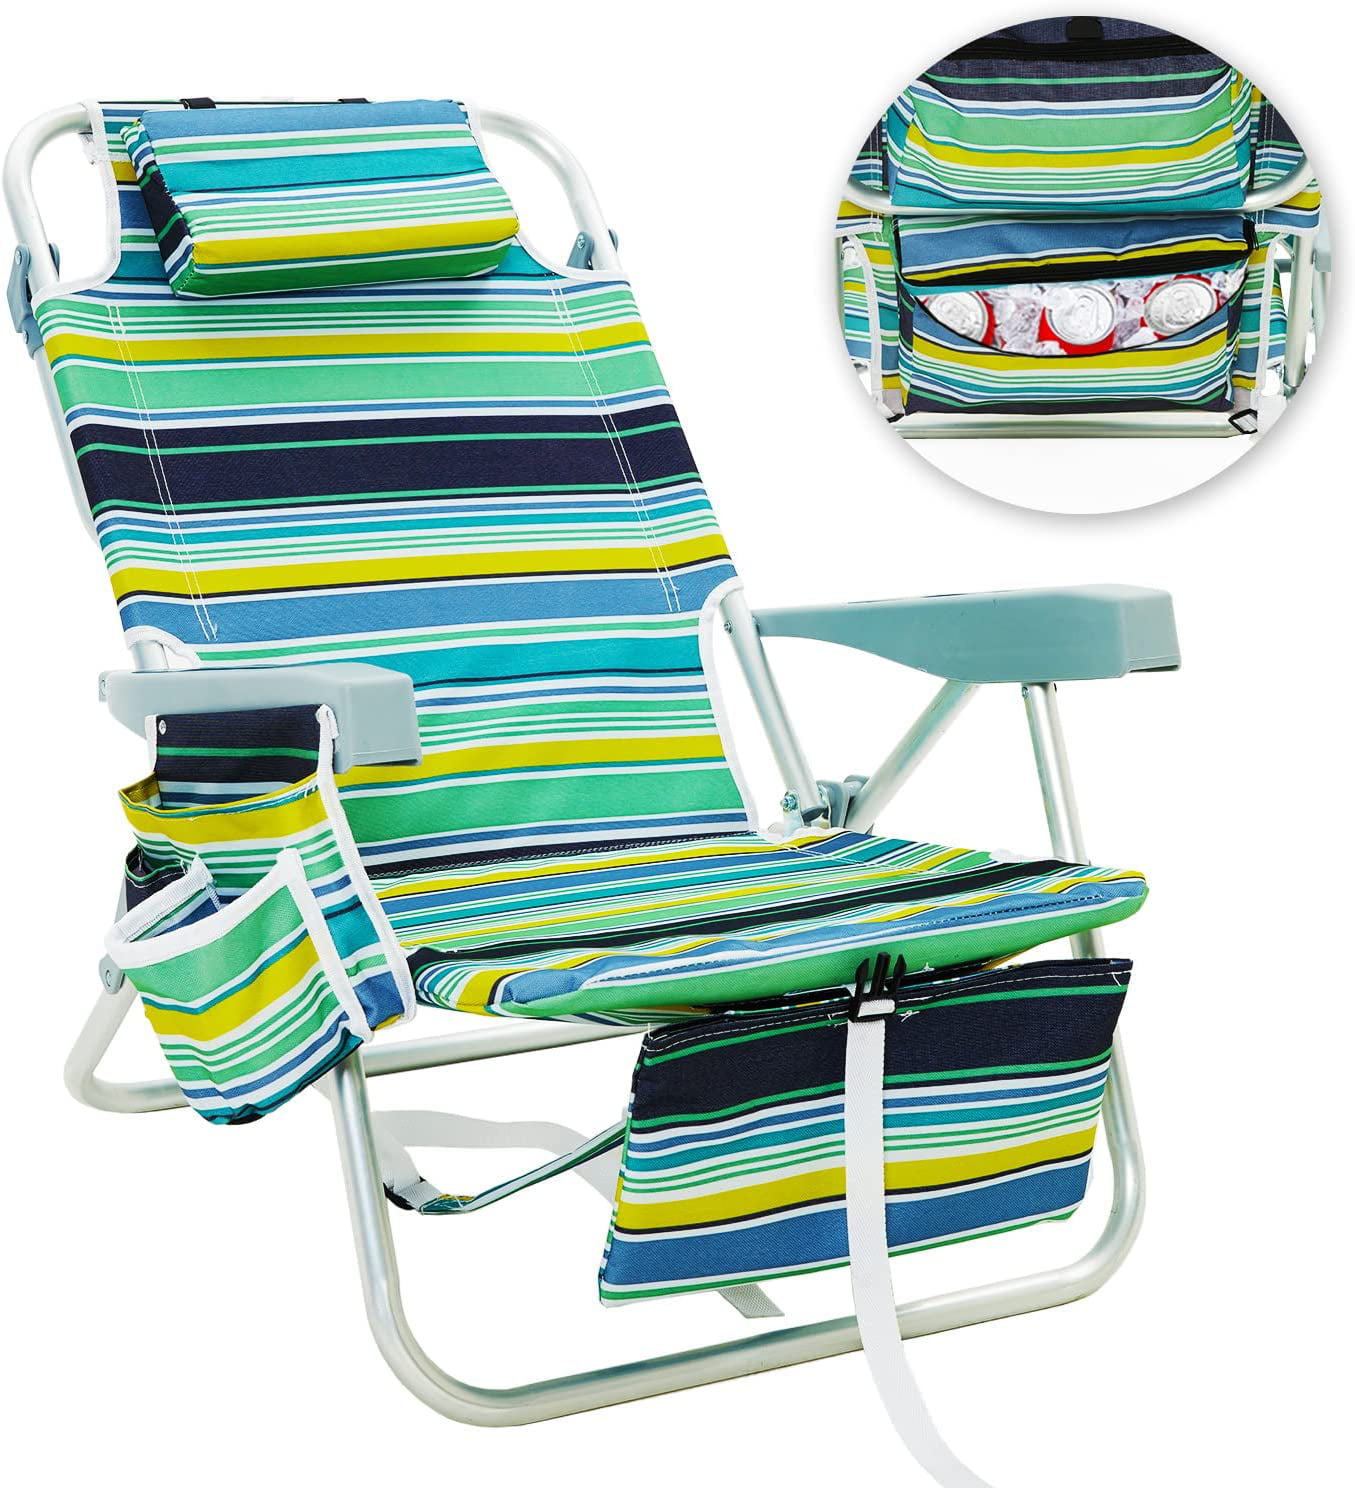 WGOS Beach Chair, Backpack Folding Chair With High Back Cooler Bag, 5- Position Reclining With Headrest, Armrest, Large Storage Pouch And Cup  Holder (1 ライト、ランタン